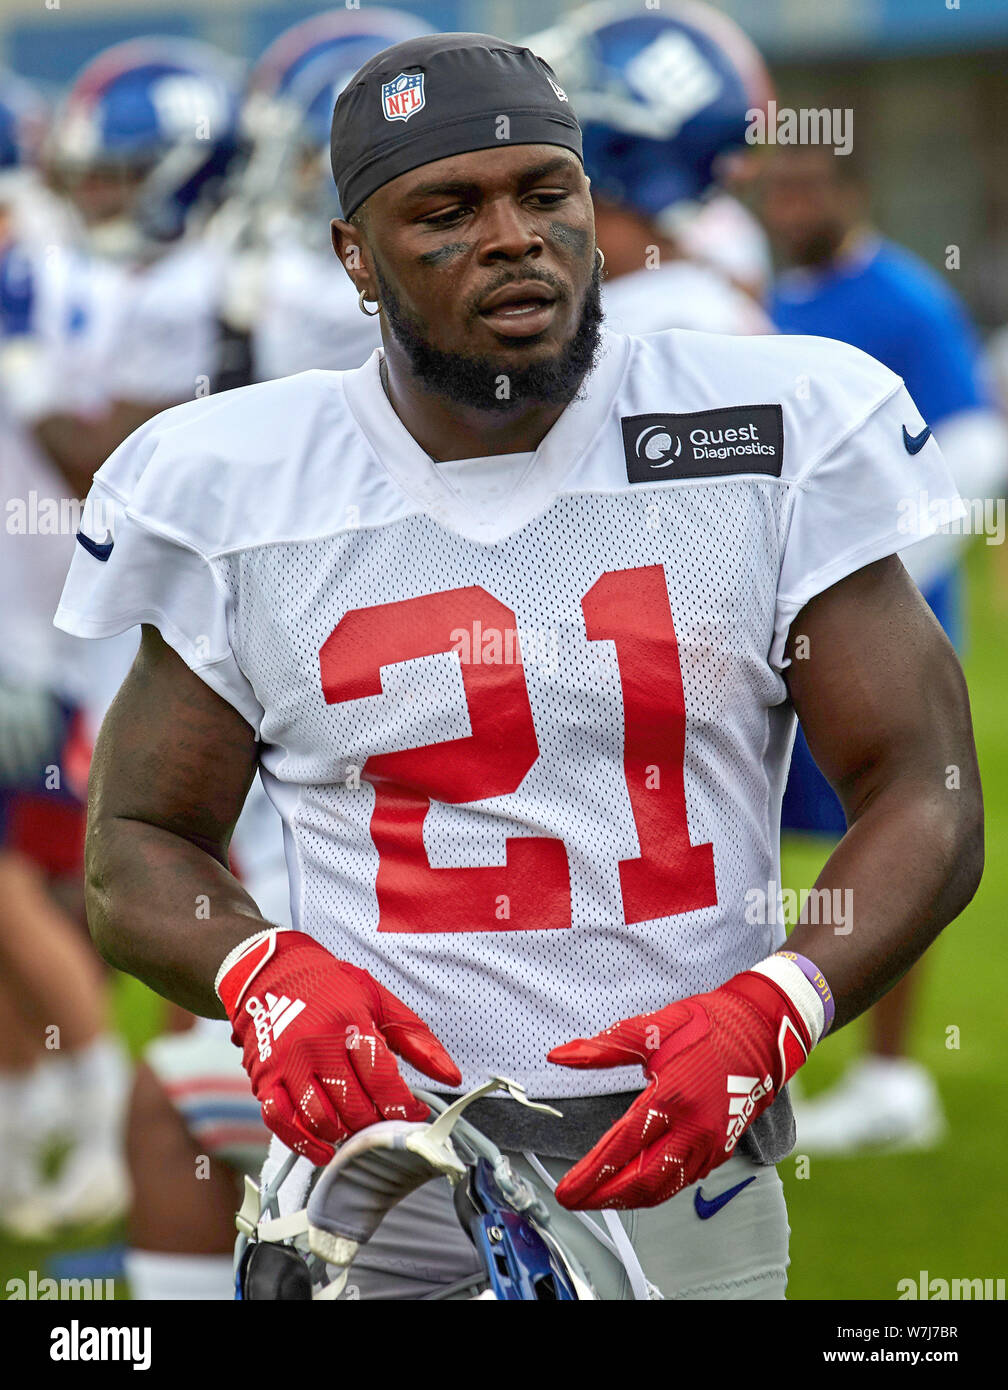 East Rutherford, New Jersey, USA. 6th Aug 2019. New York Giants free safety Jabrill  Peppers (21) during training camp at the Quest Diagnostics Training Center  in East Rutherford, New Jersey. Duncan Williams/CSM